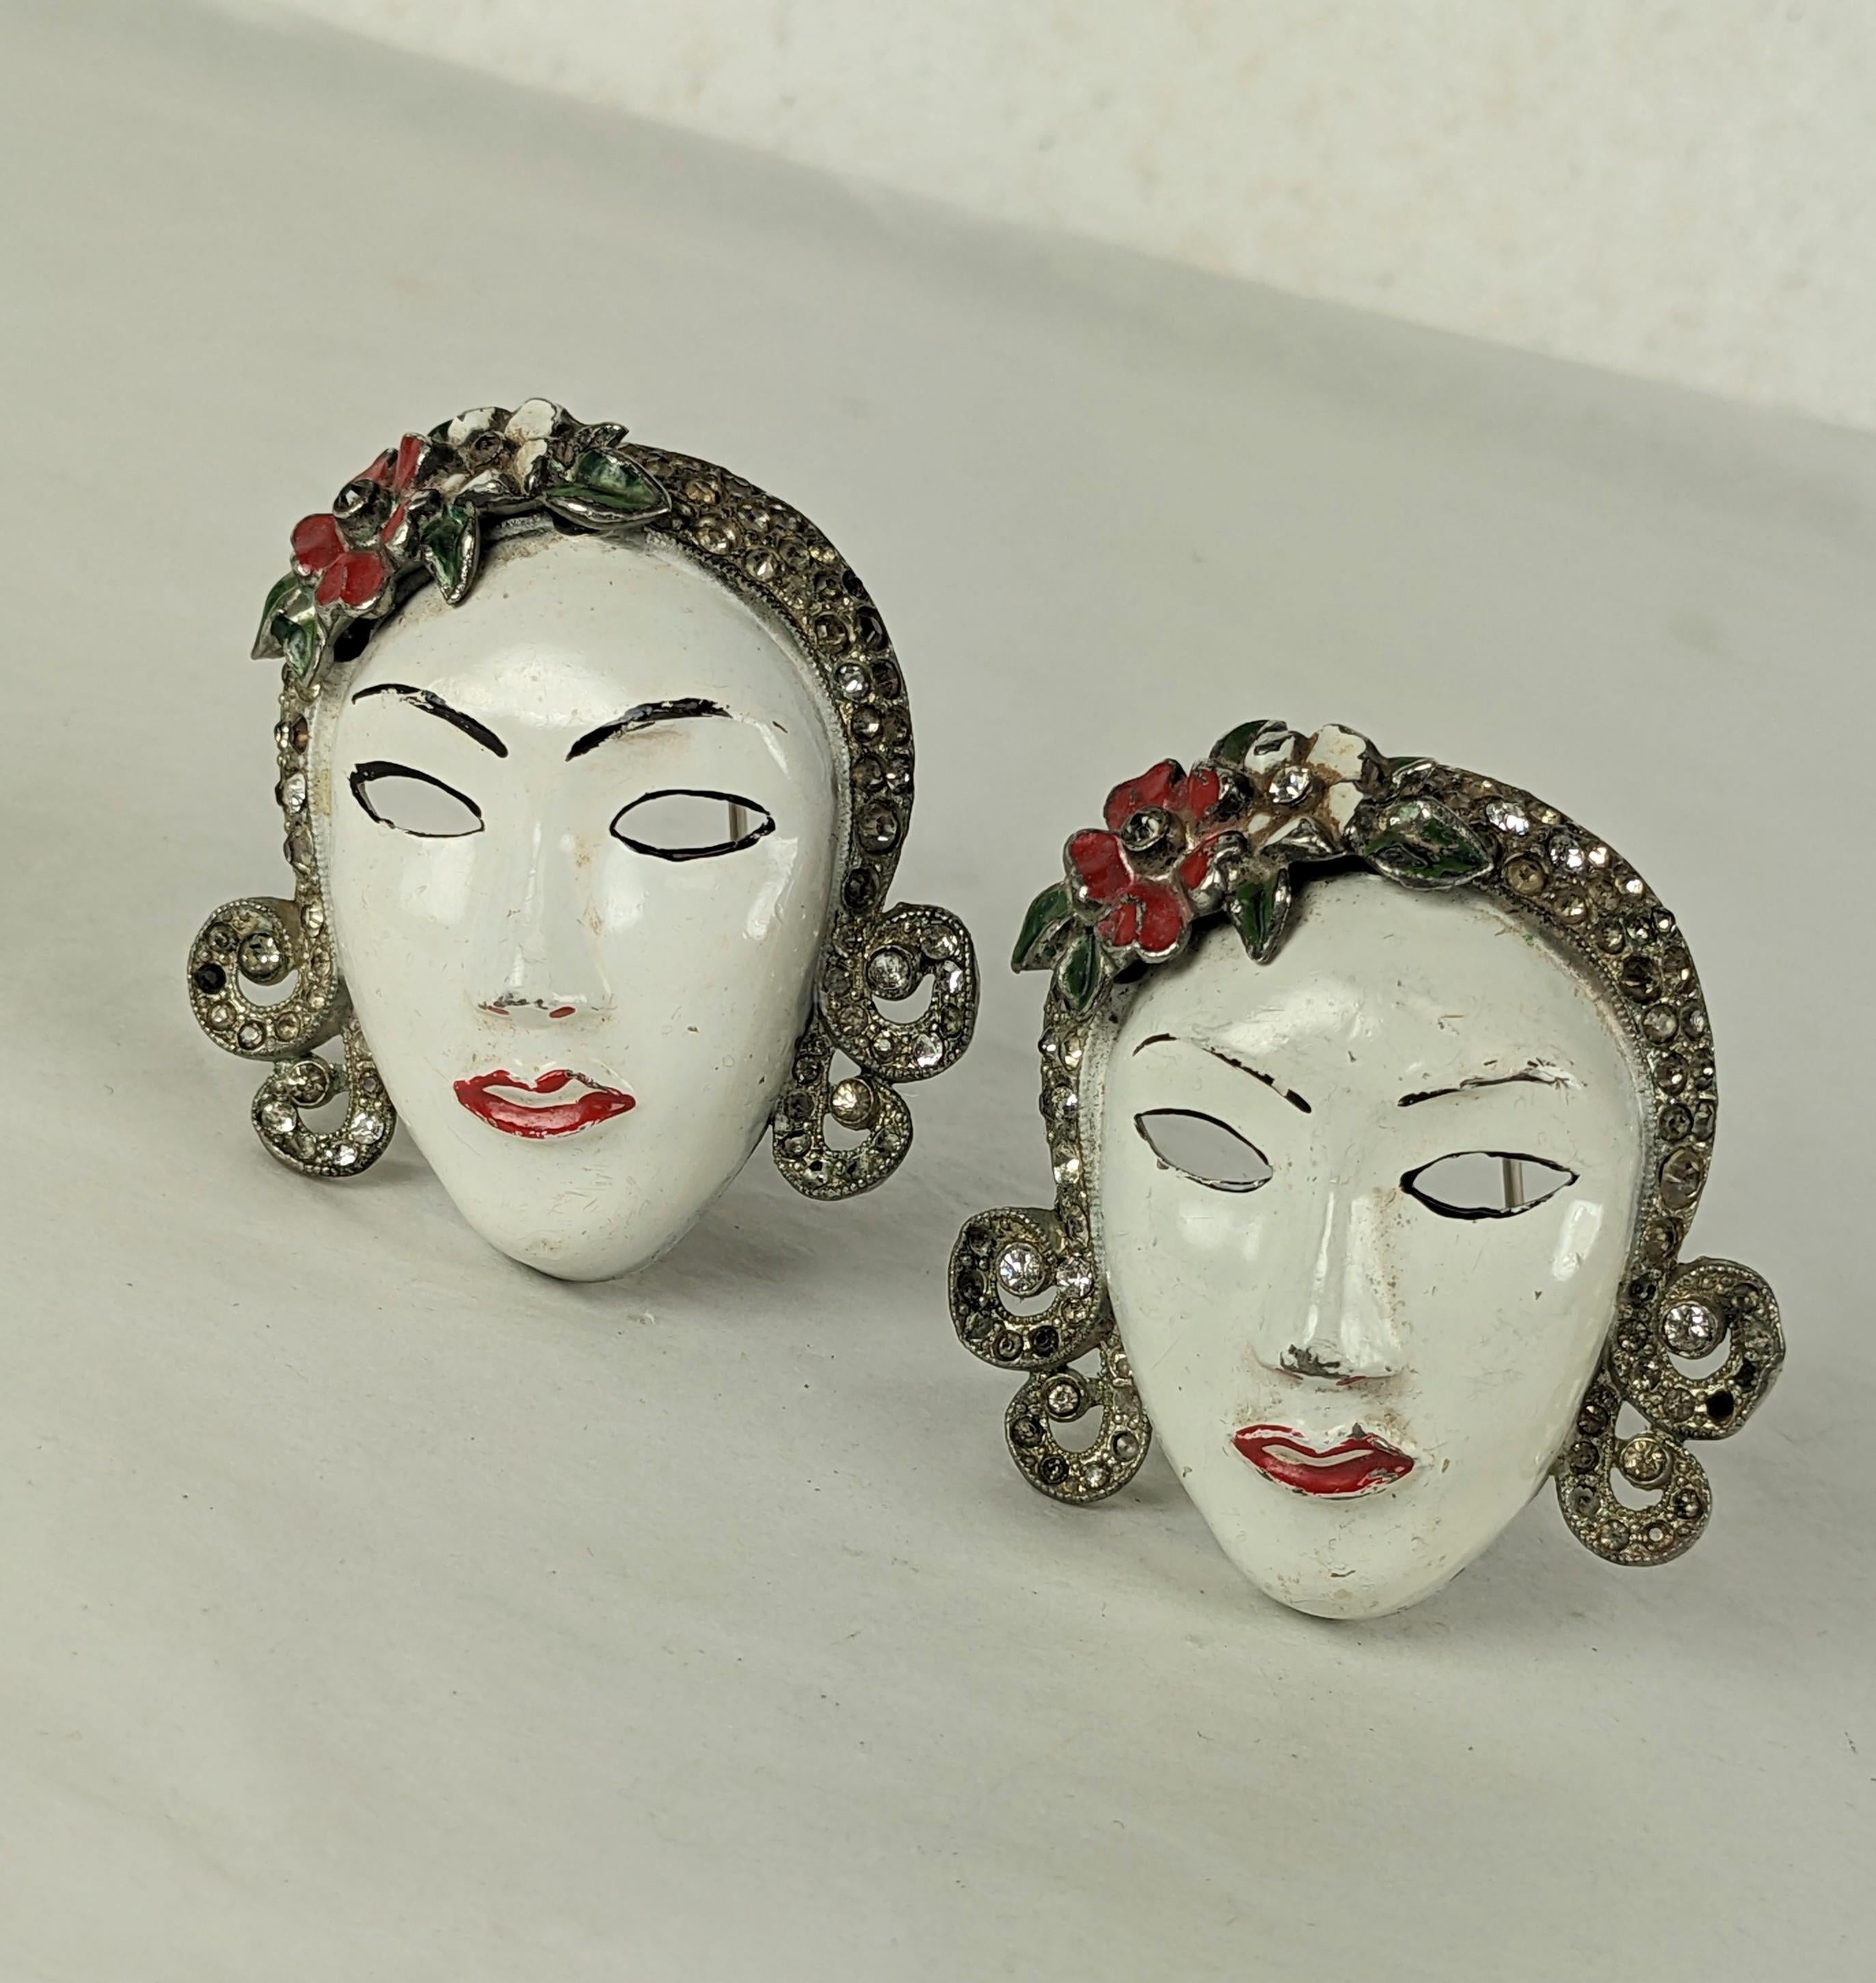 Extremely Rare pair of striking Coro Art Deco Enamel Lady Clips from the 1930's. Large in scale with enameled flower accents and pave stones in hair.
2